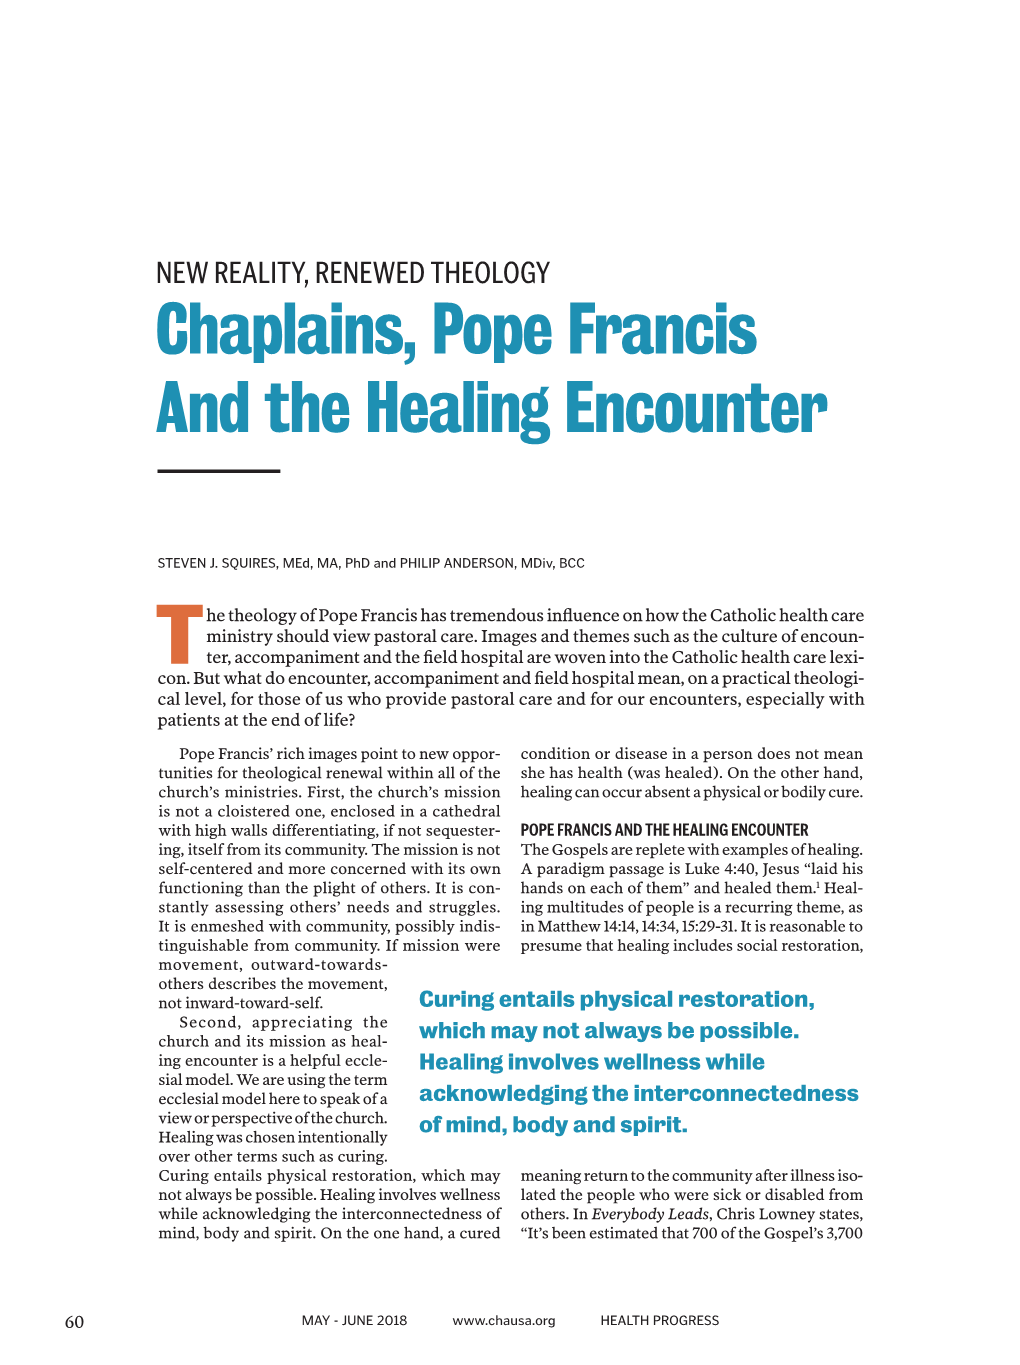 Chaplains, Pope Francis and the Healing Encounter